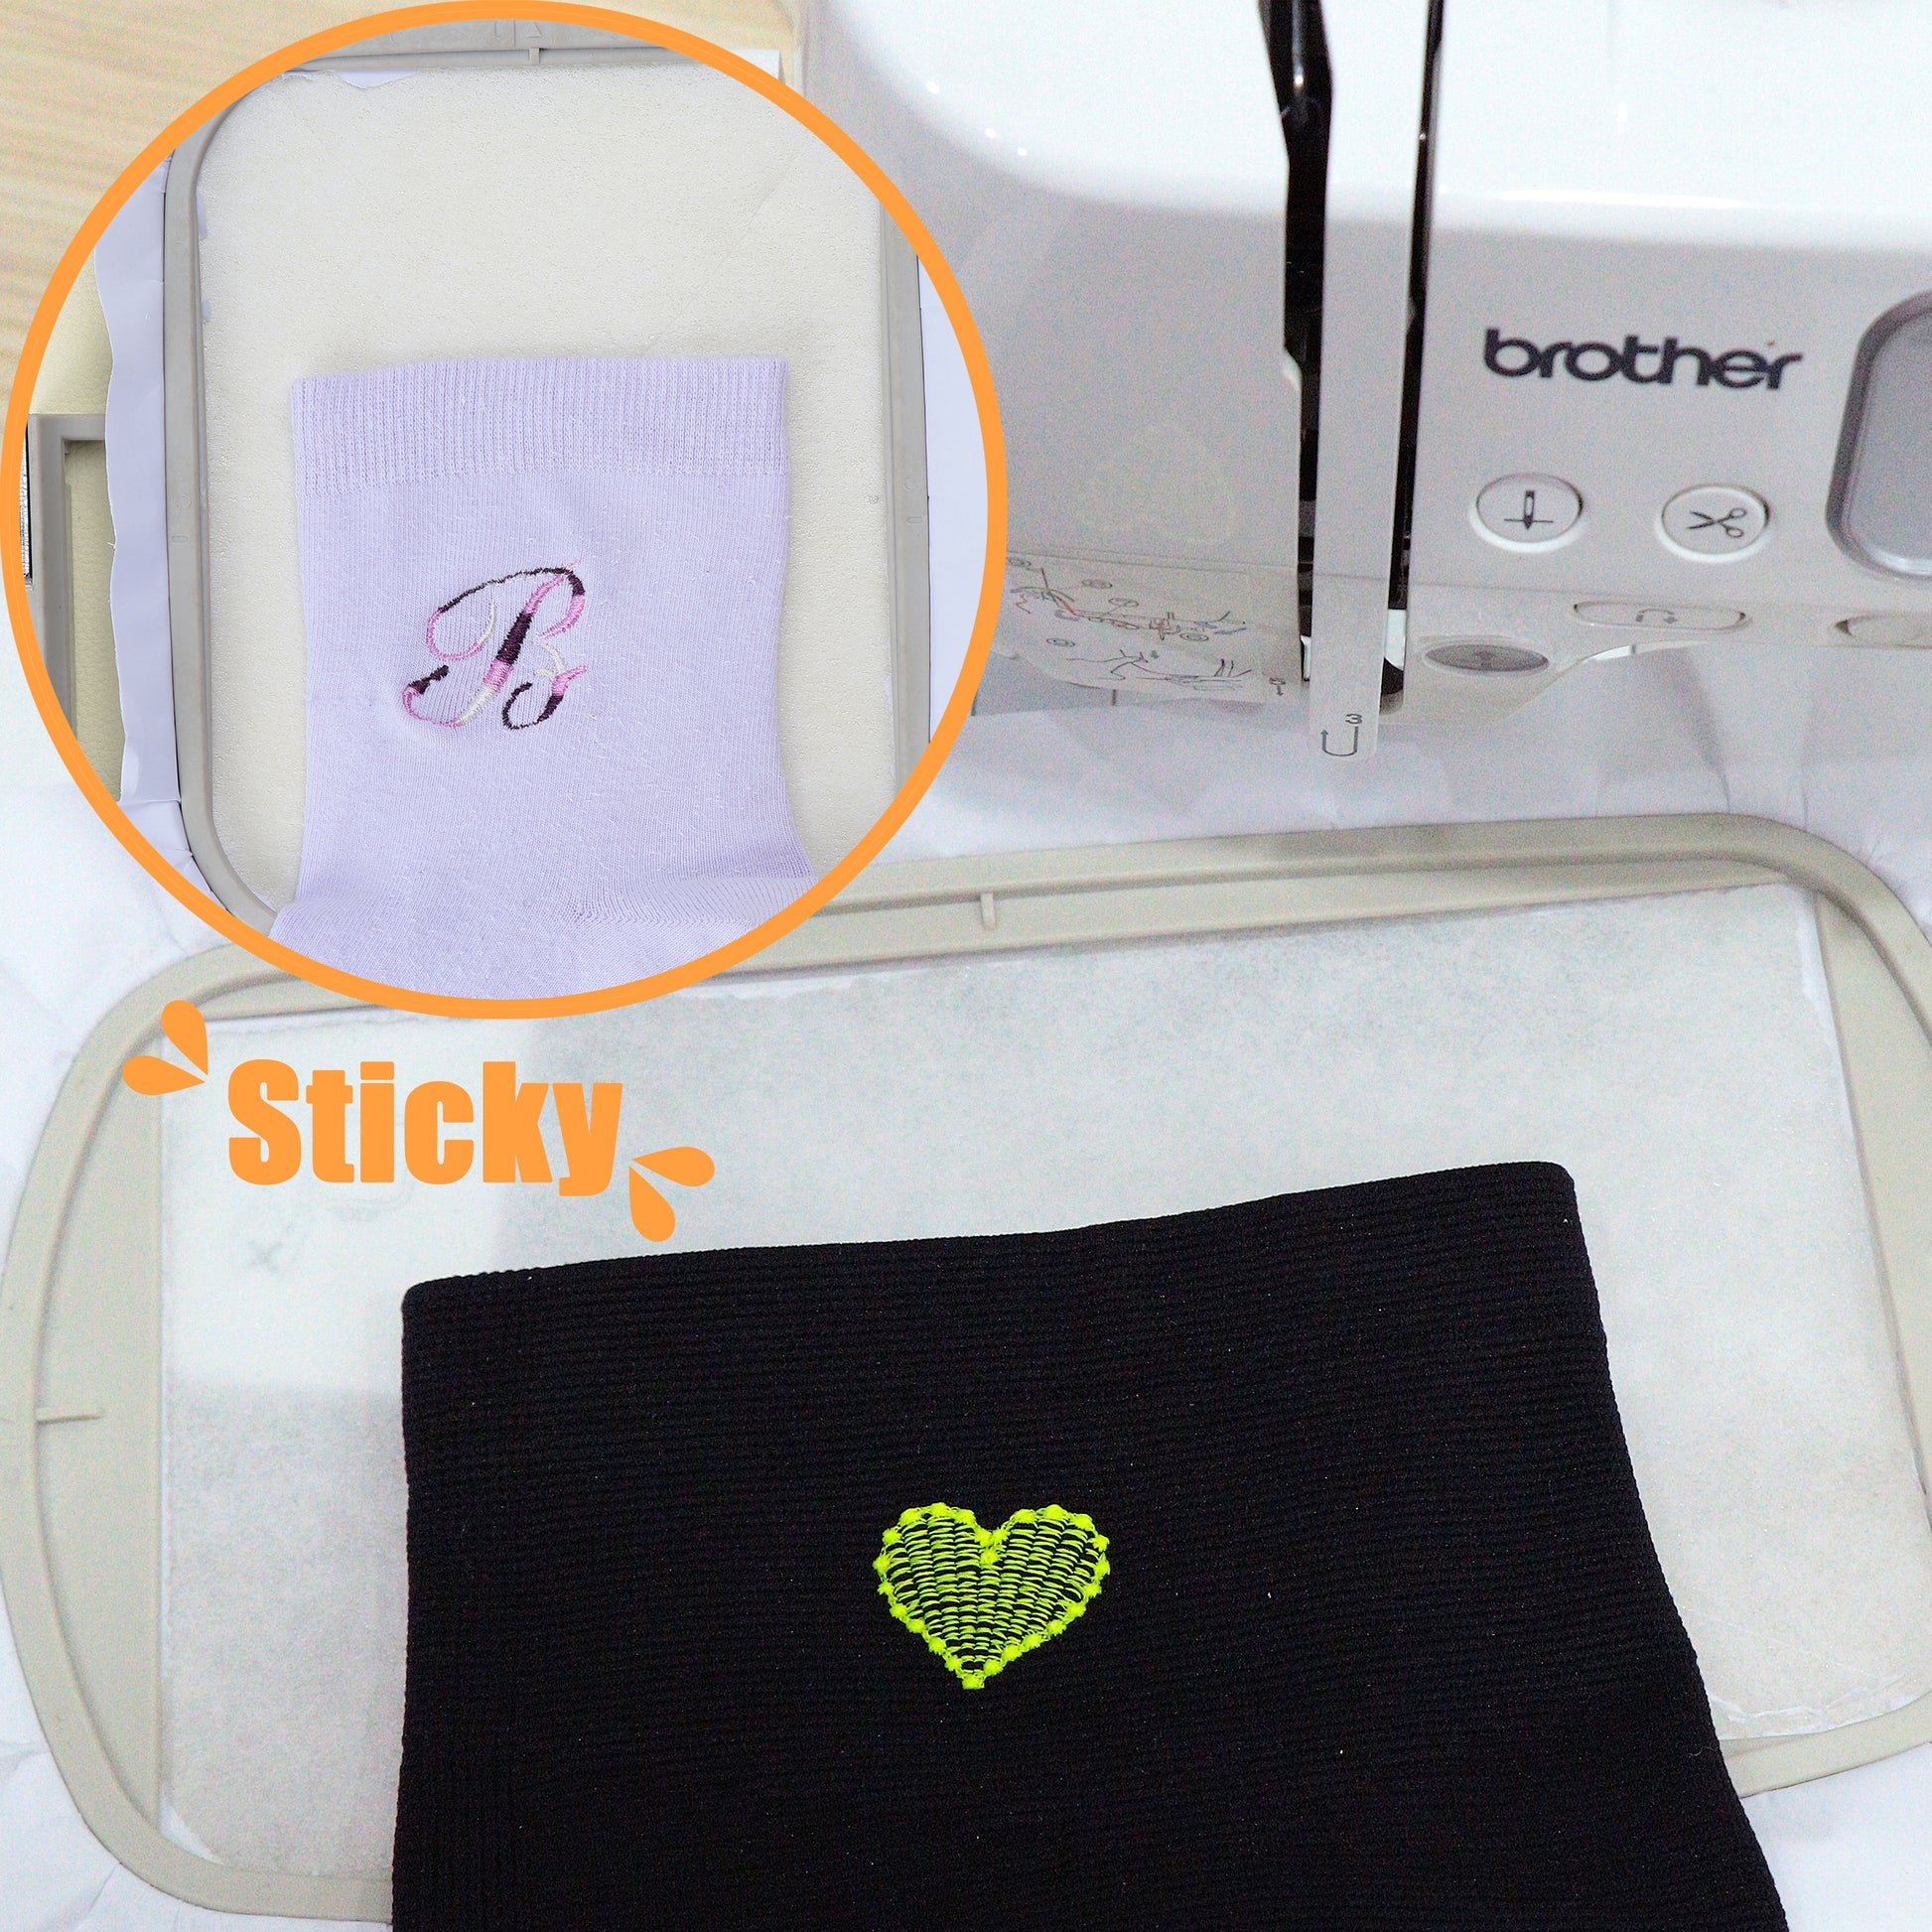 Easy Tear Away Embroidery Backing Stabilizer - China Easy Tear